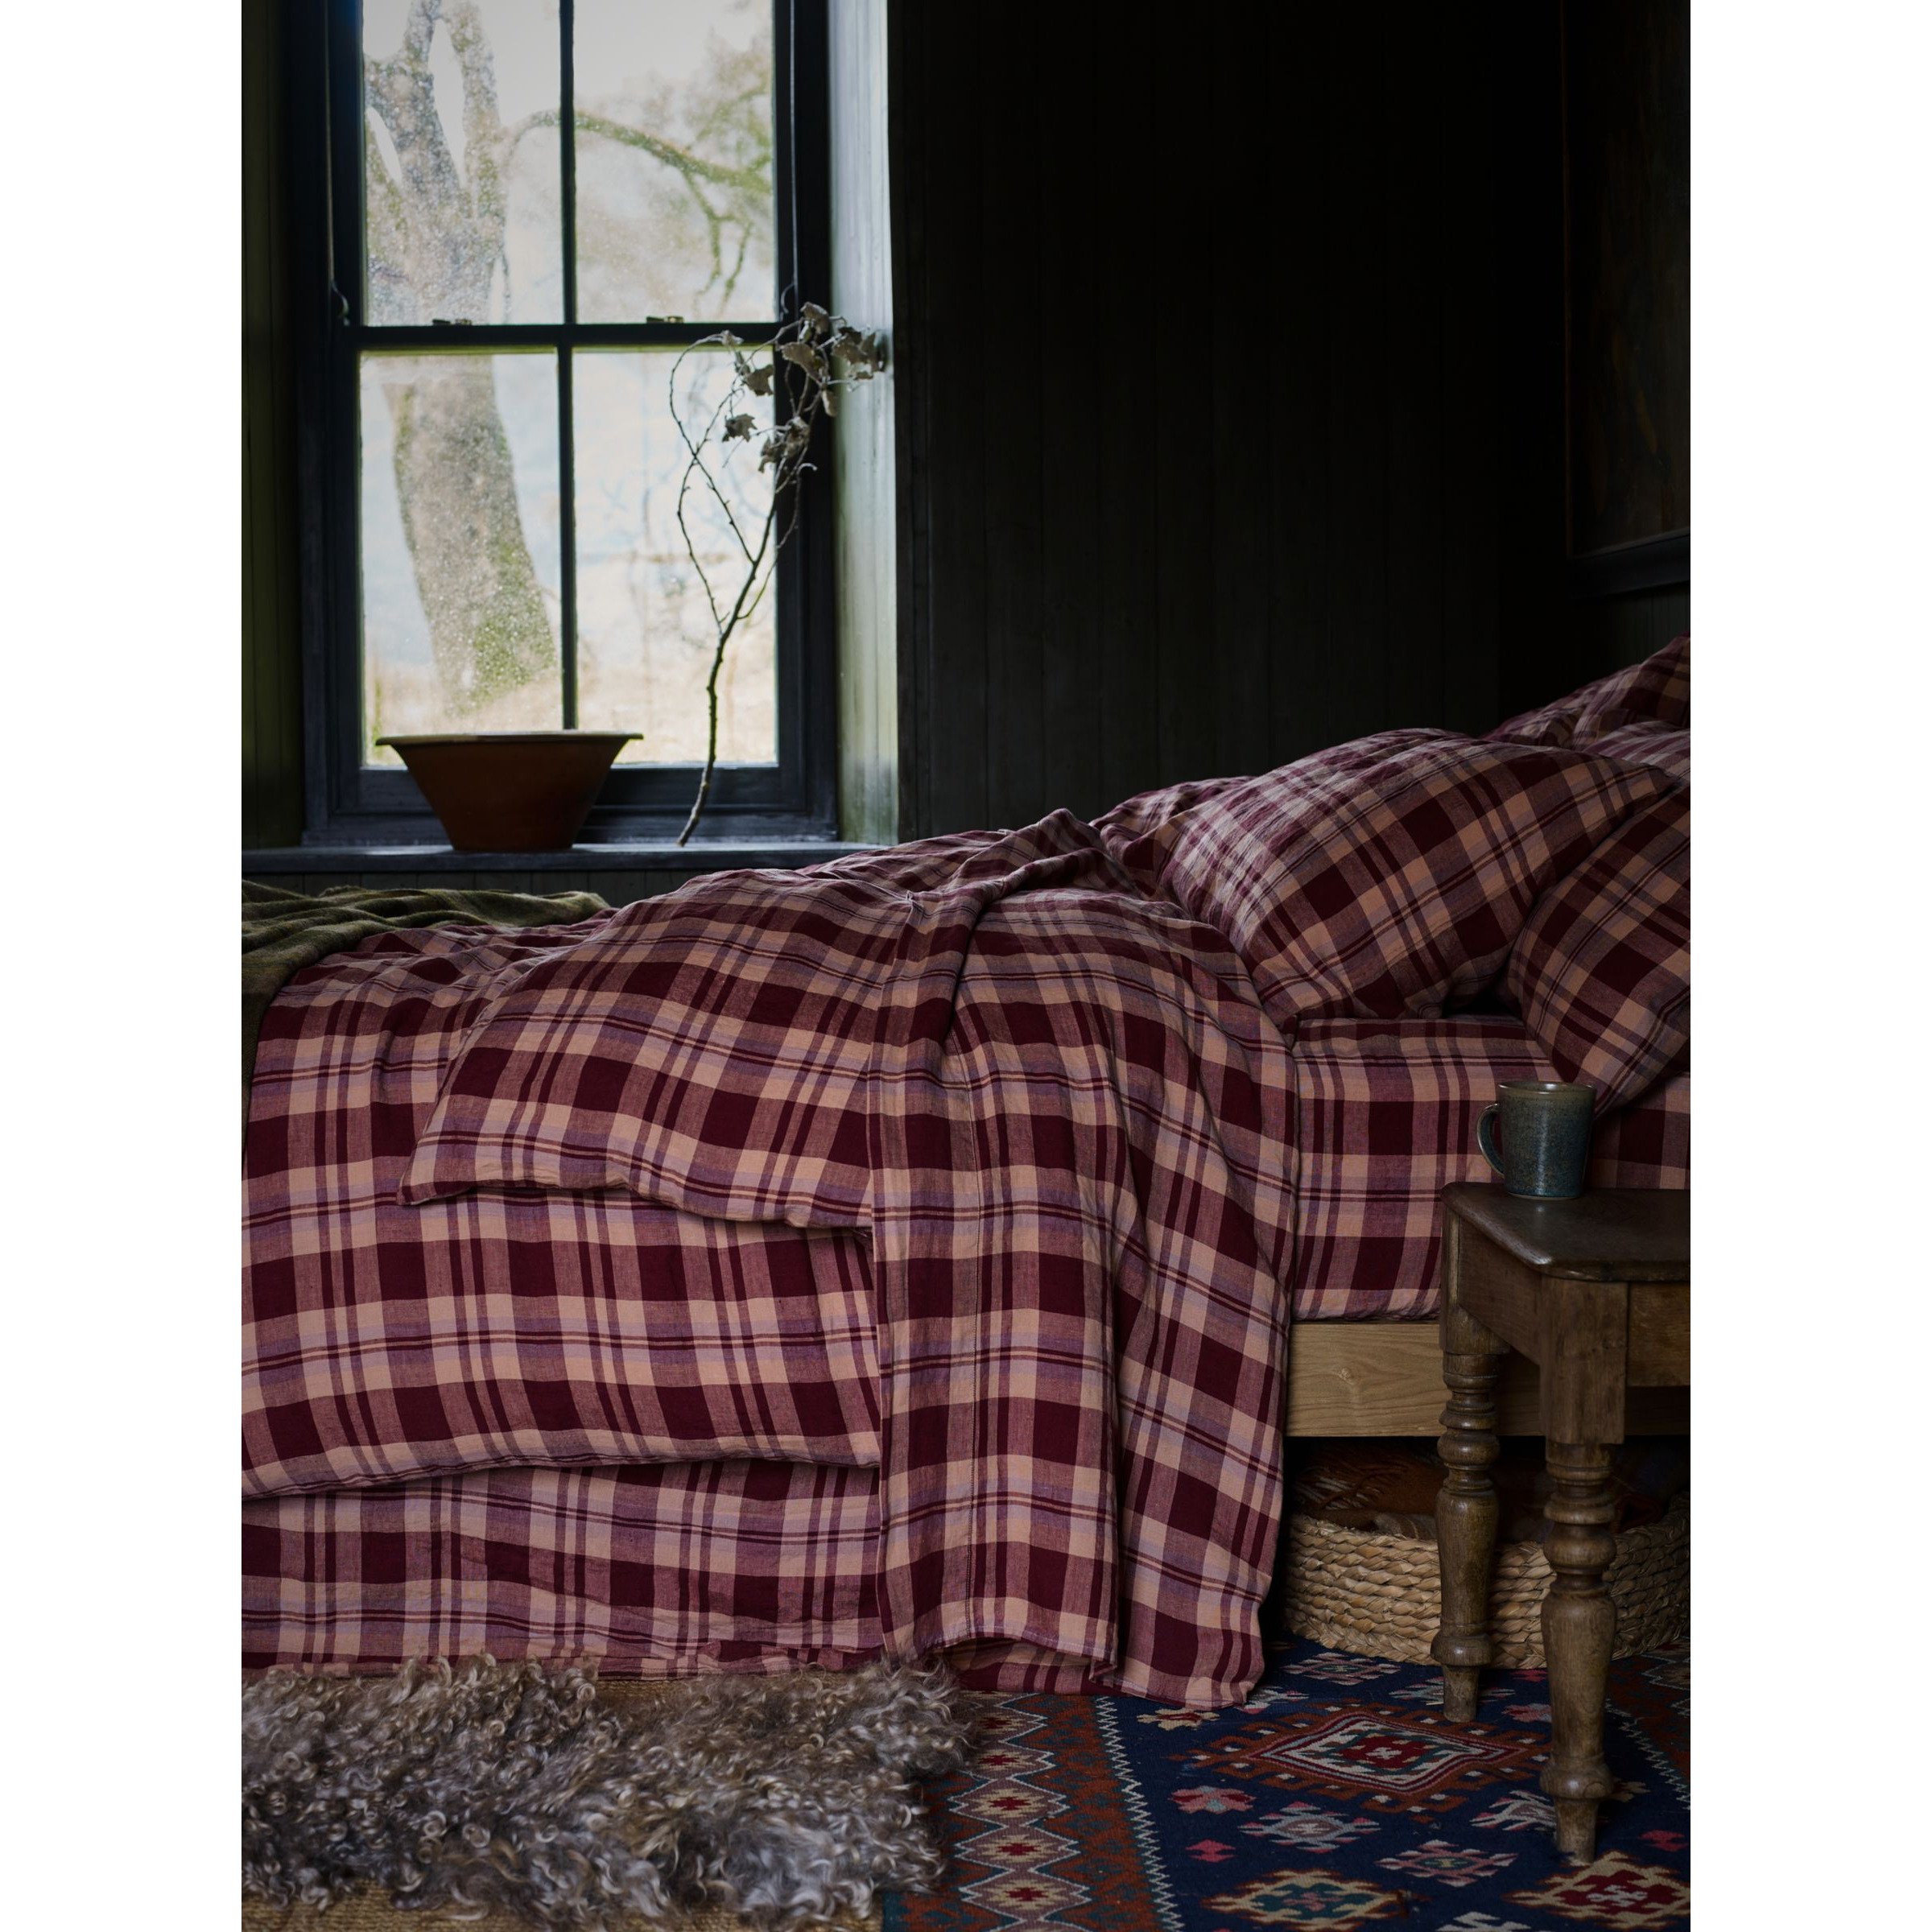 Piglet in Bed Plaid Linen Flat Sheets - image 1